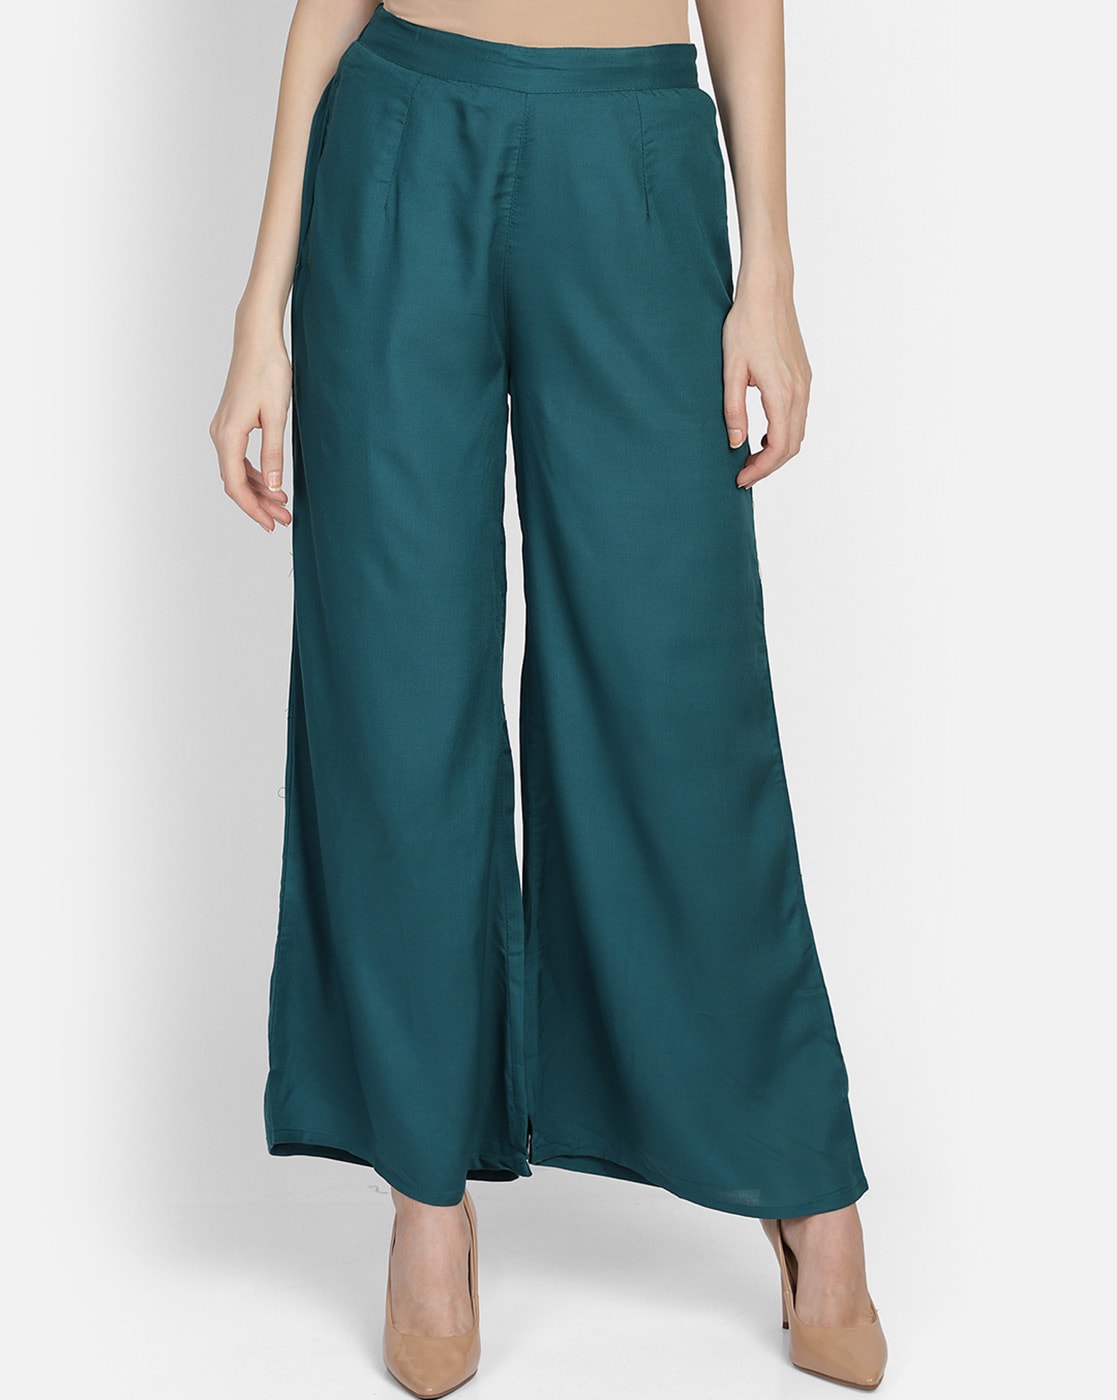 Washable 100 Percent Linen Green Colour Casual Wear Straight Pant Ladies  Trousers at Best Price in Karur  Master Linens Incorporation